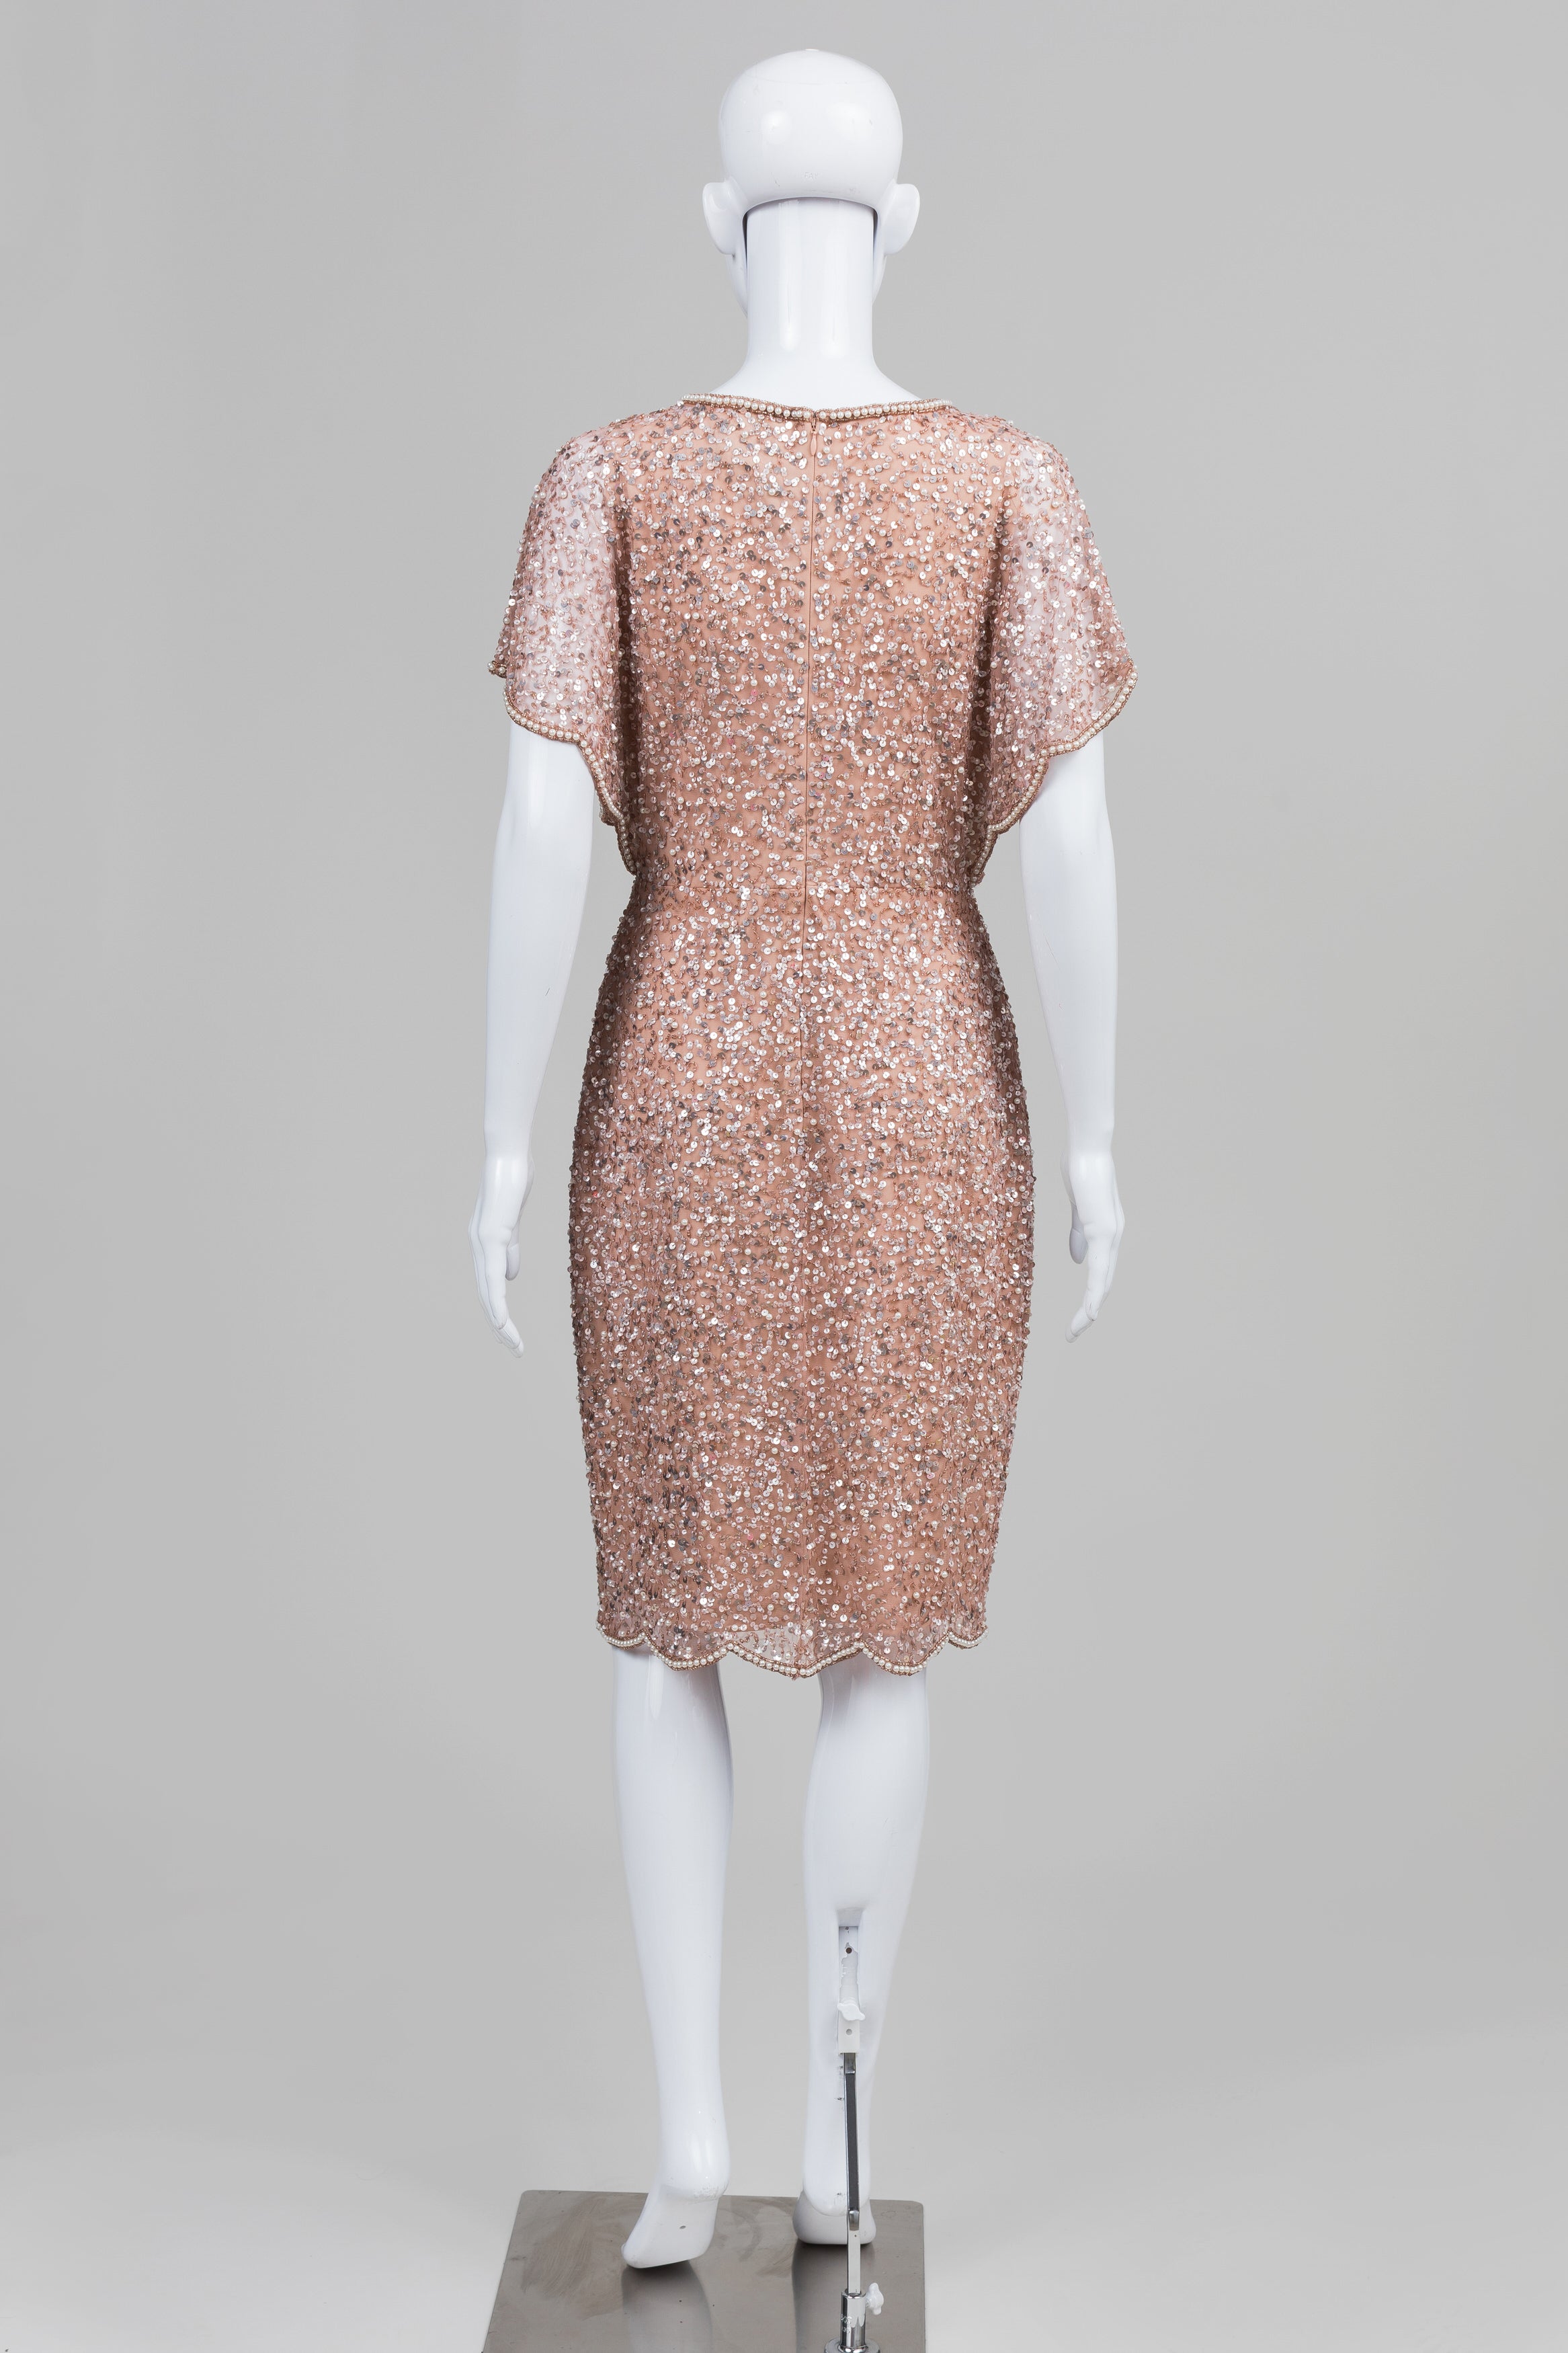 Adrianna Papell Vintage Dusty Rose Sequin Short Sleeve Dress (8)